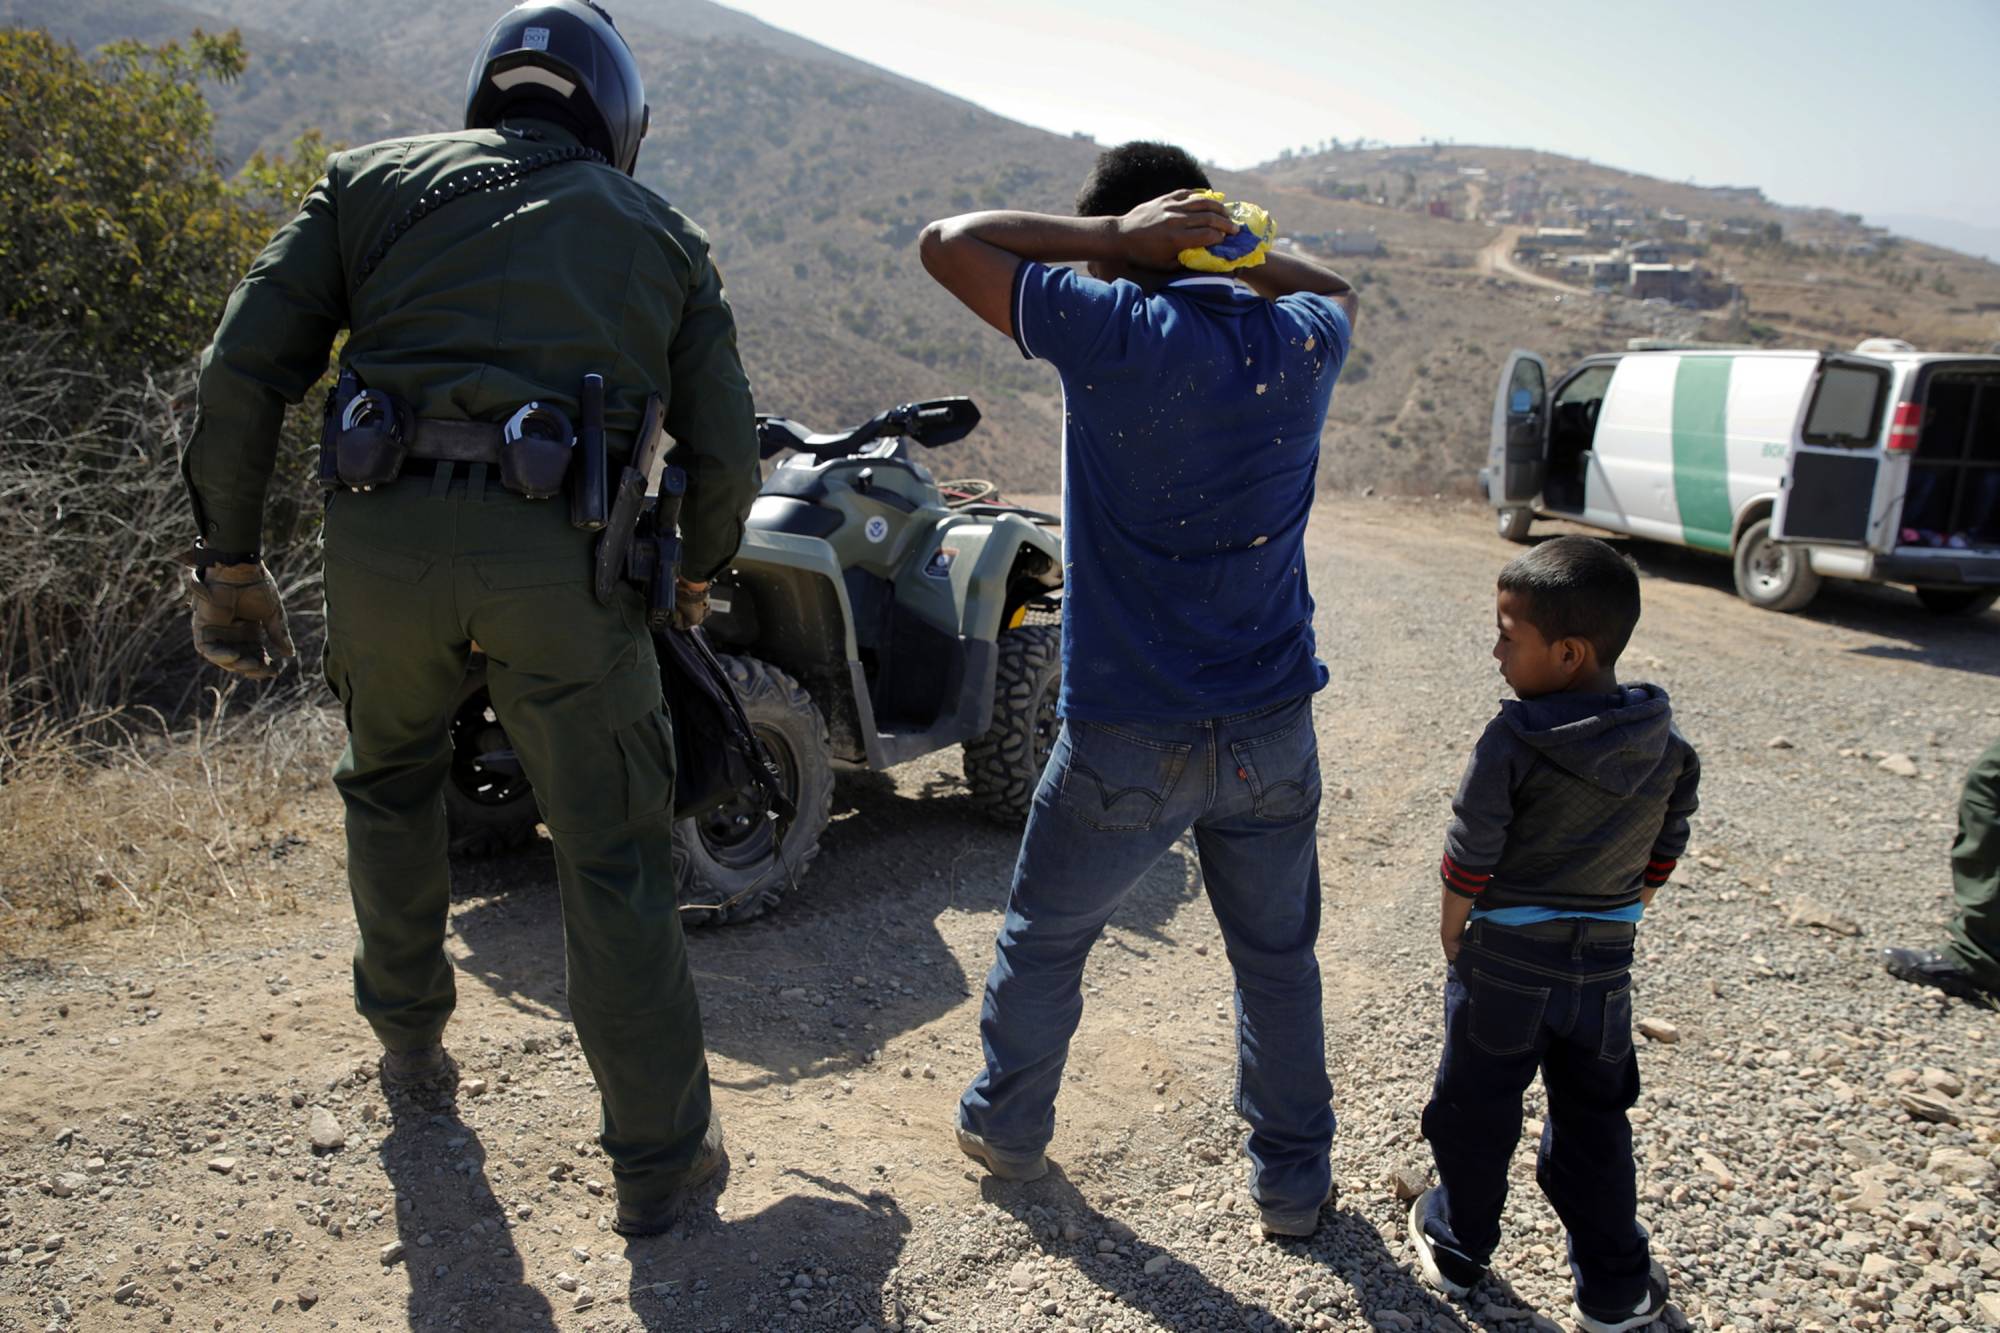 FILE - In this June 28, 2018, file photo, a Guatemalan father and son, who crossed the U.S.-Mexico border illegally, are apprehended by a U.S. Border Patrol agent in San Diego. Children torn from their parents, refugees turned away, tear gas fired on asylum-seekers, and a swath of the globe derided by the president in crude language. In a breathless 2018, they were just a handful of headlines on immigration, one of the year’s most dominant issues. (AP Photo/Jae C. Hong, File)